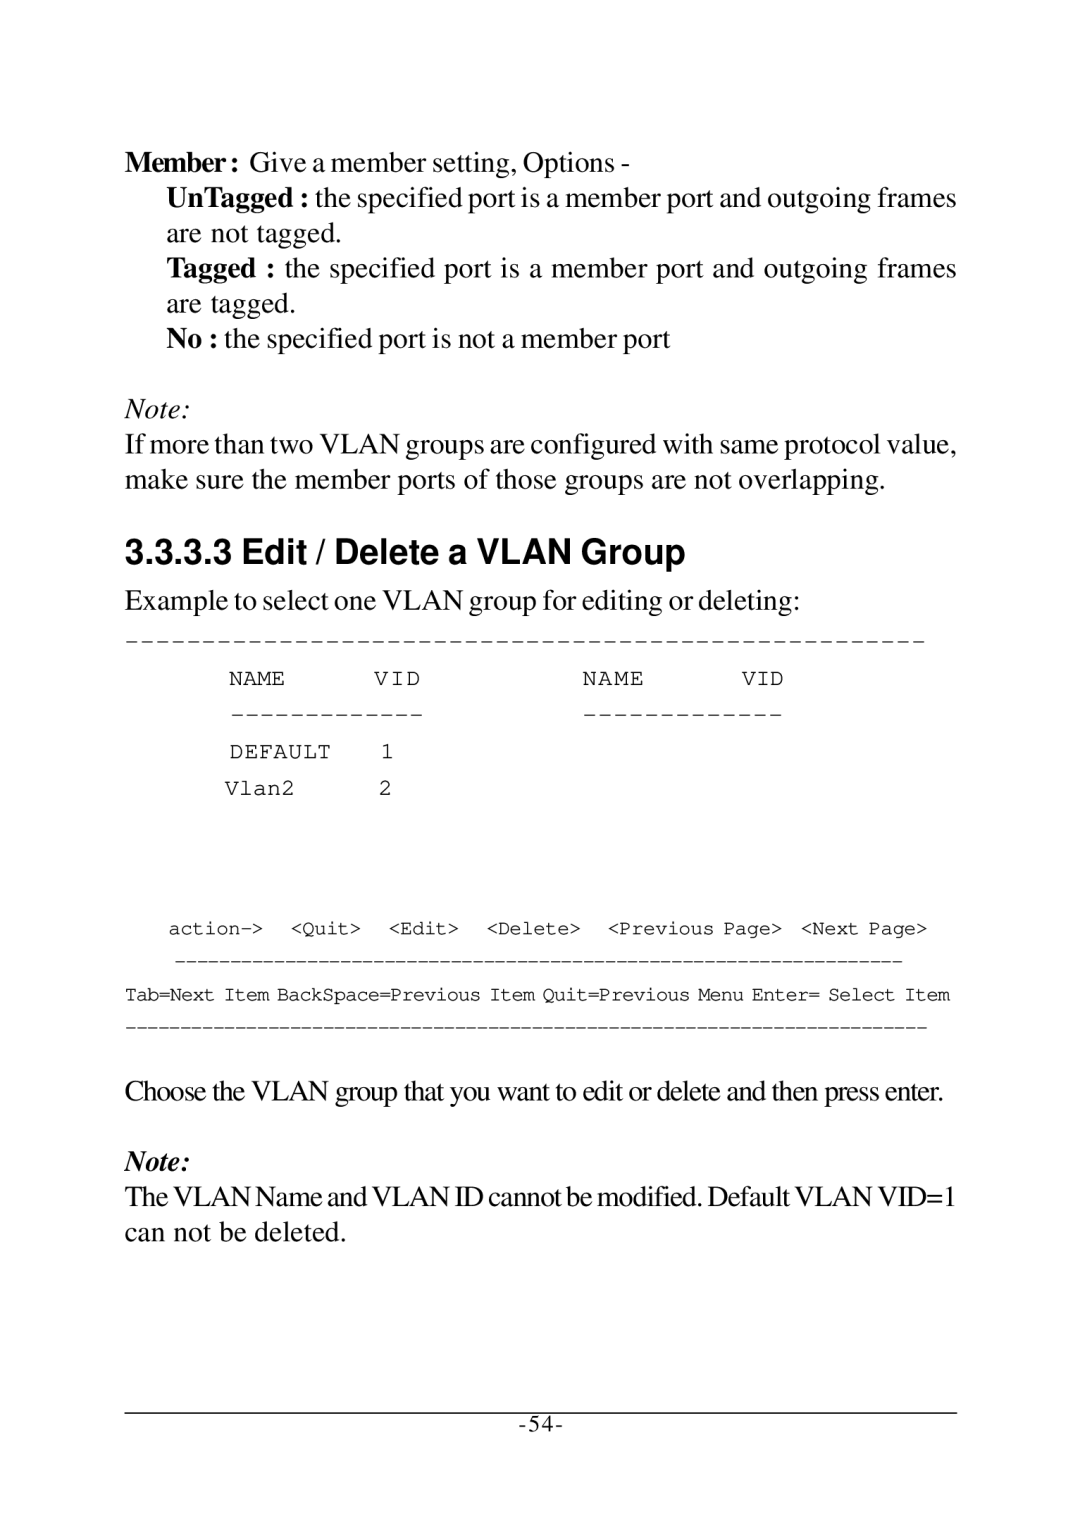 KTI Networks KS-2260 operation manual Edit / Delete a Vlan Group, Example to select one Vlan group for editing or deleting 